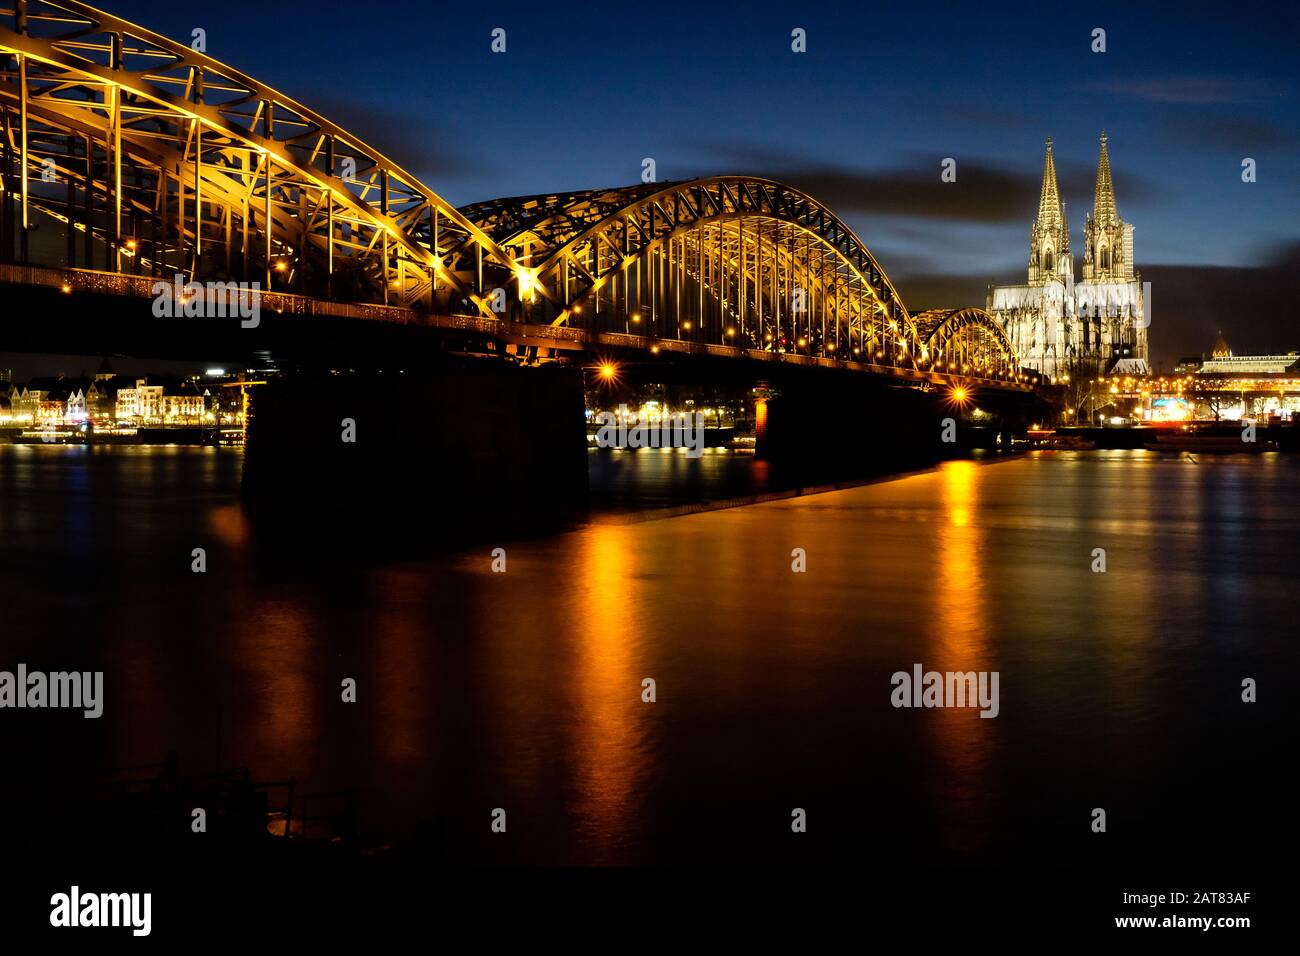 Cologne bridge illuminated at night with cathedral in background Stock Photo